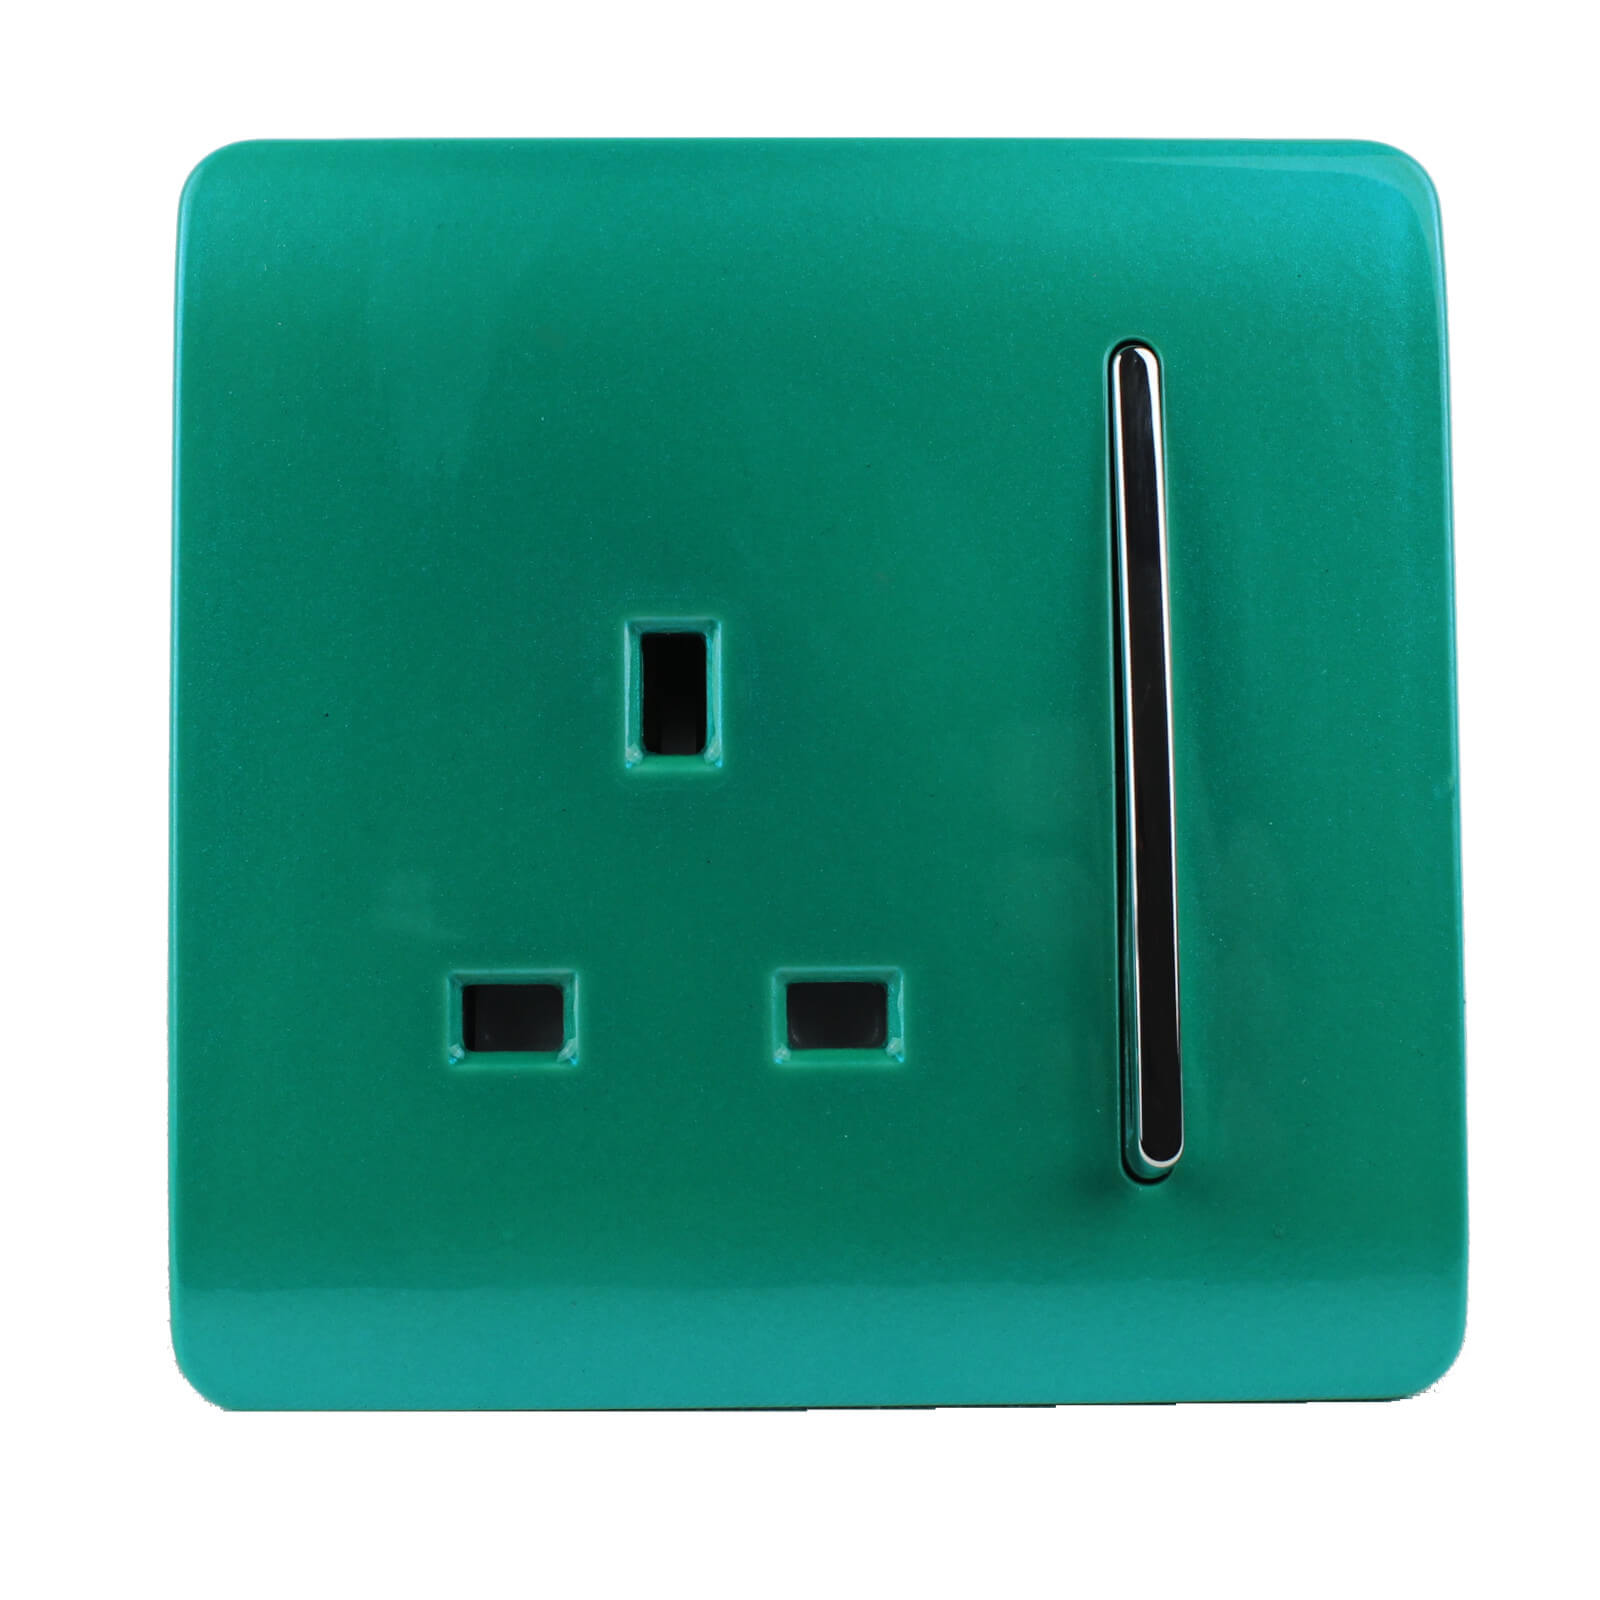 Trendi Switch 1 Gang 13A Plug Light Switch in Screwless Teal